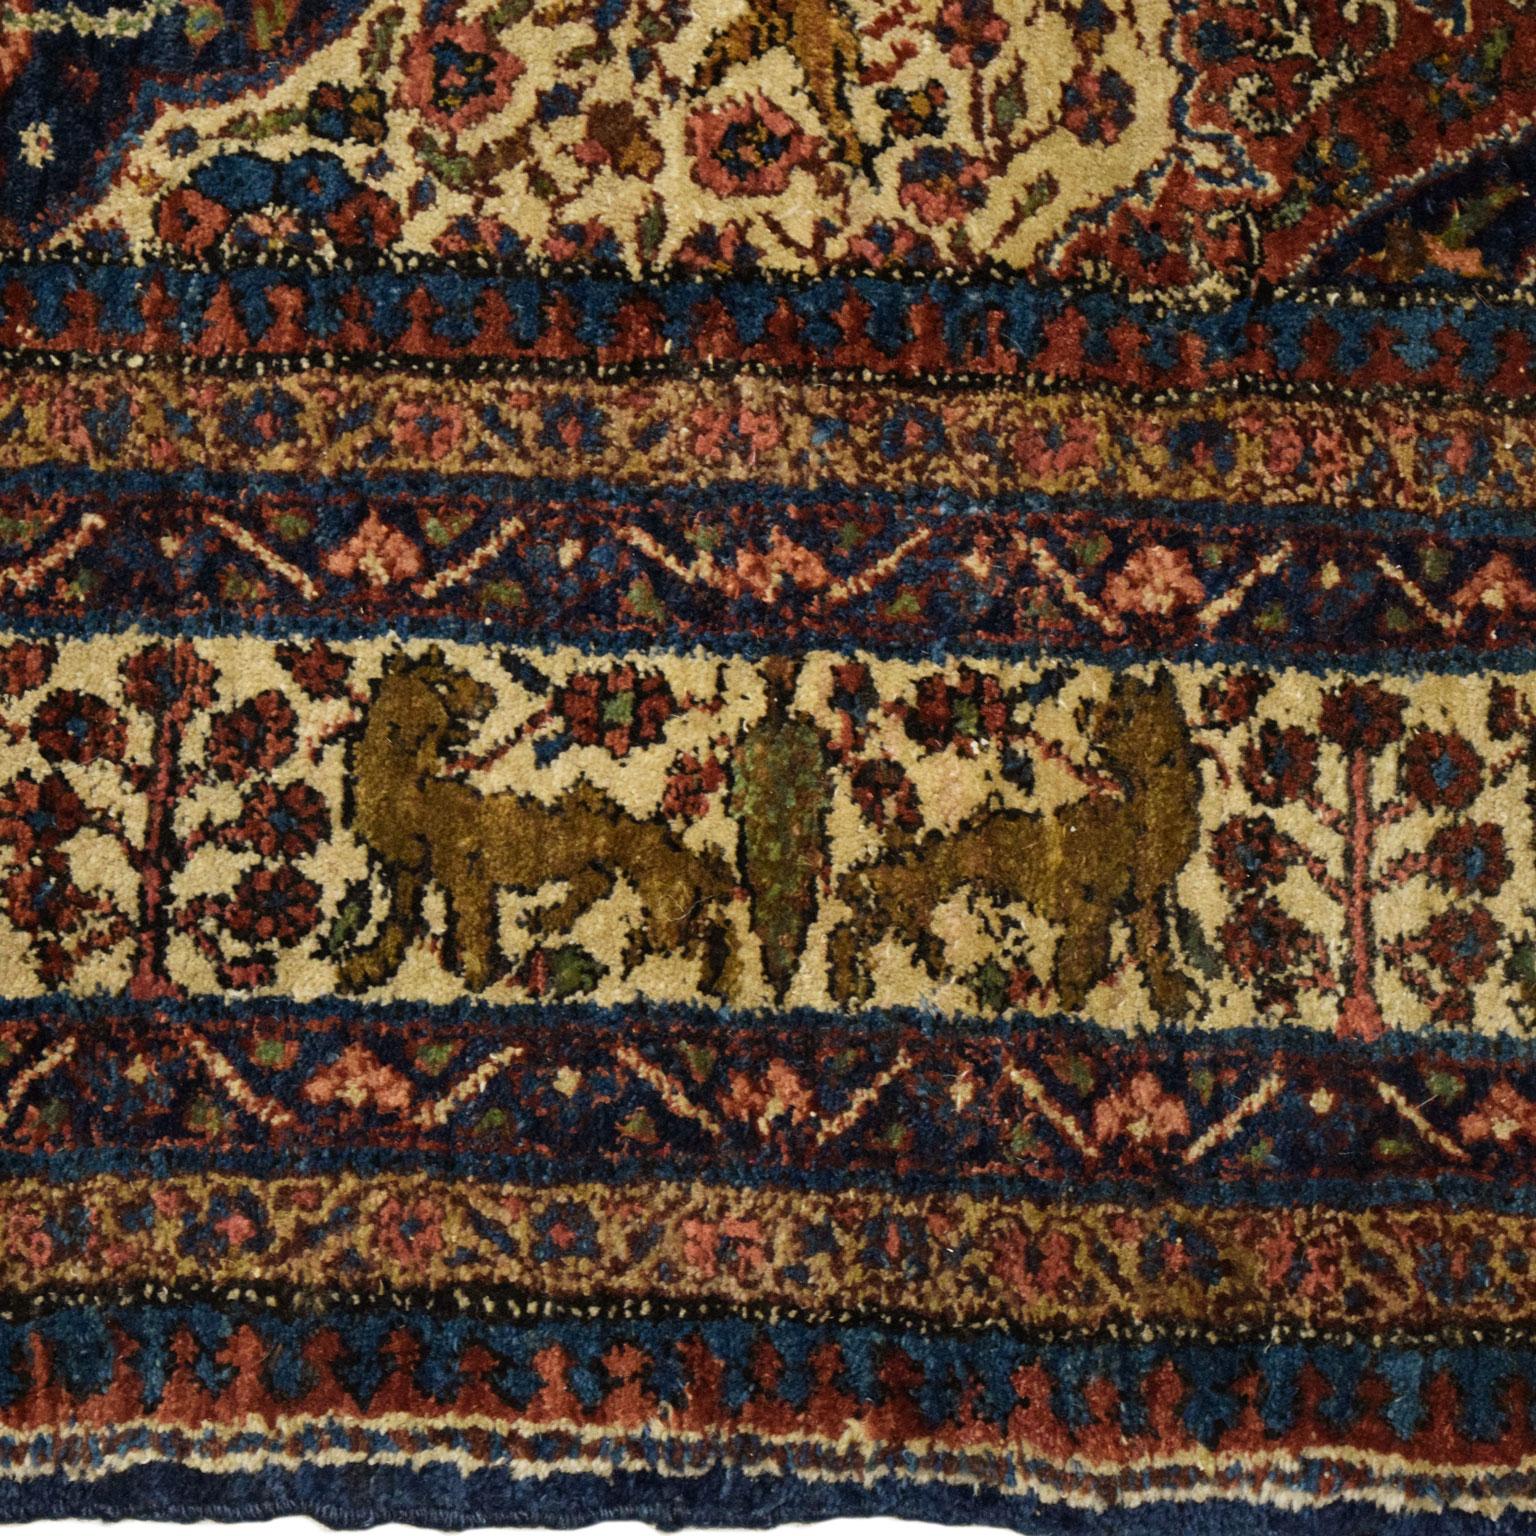 Early 20th Century Antique 1900s Wool Persian Khoy Rug in Cream, Green, and Indigo, 5' x 8' For Sale